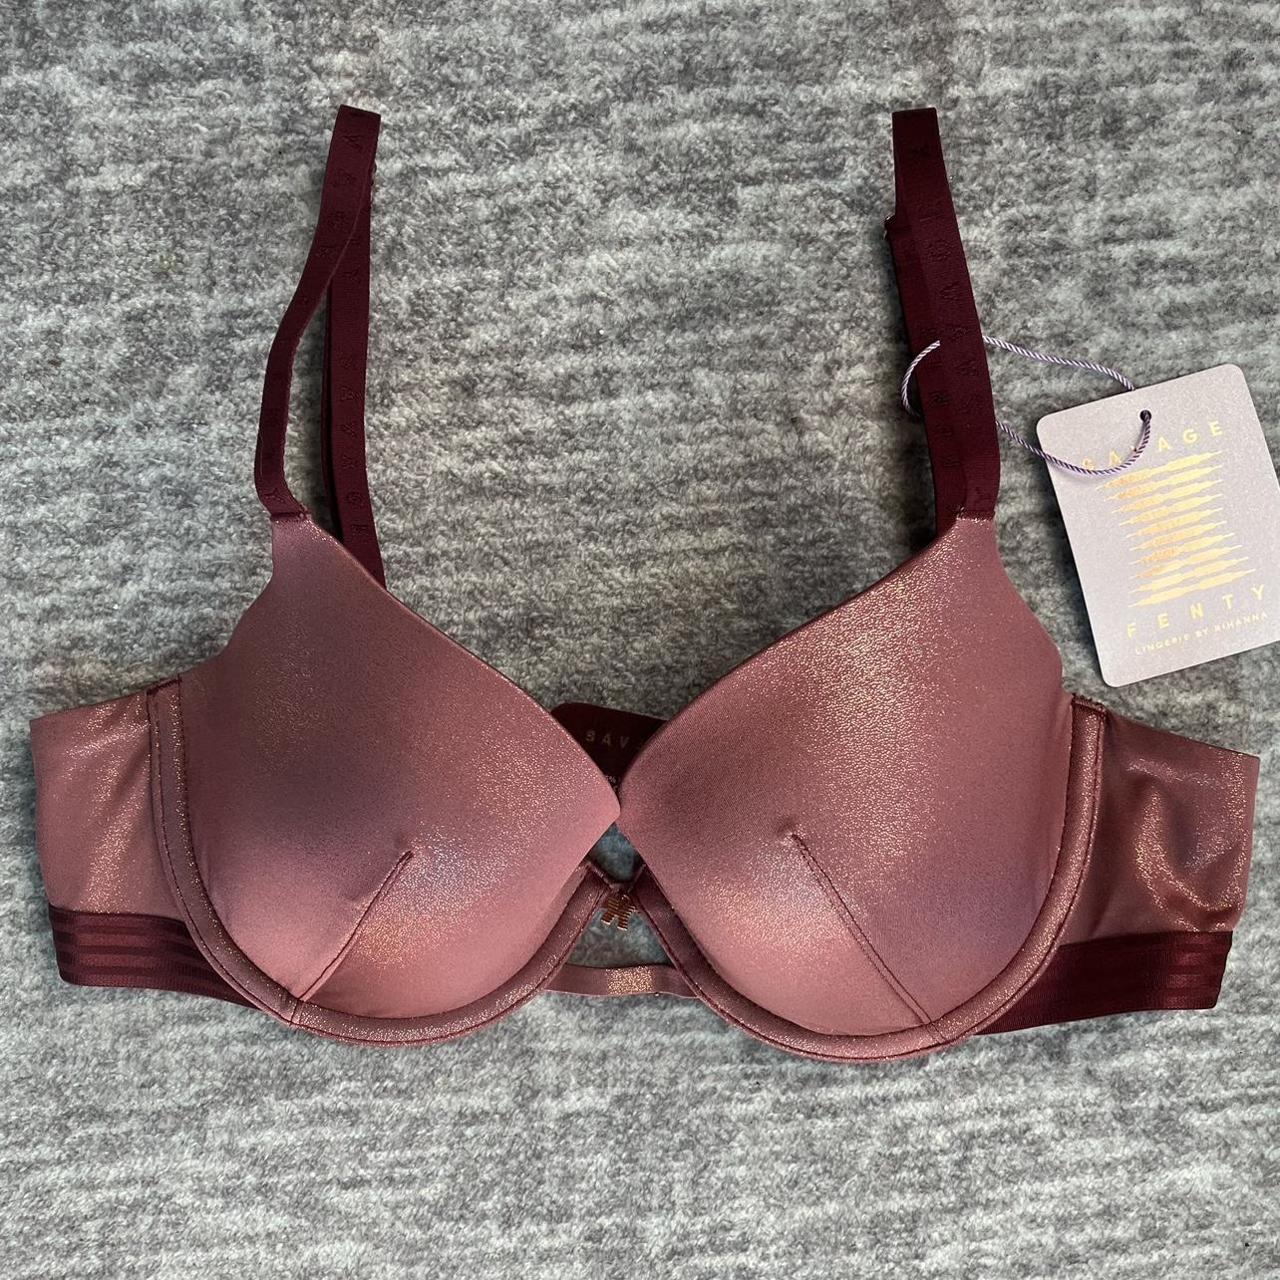 Brand new with tags Savage X Fenty “red cocoa - Depop